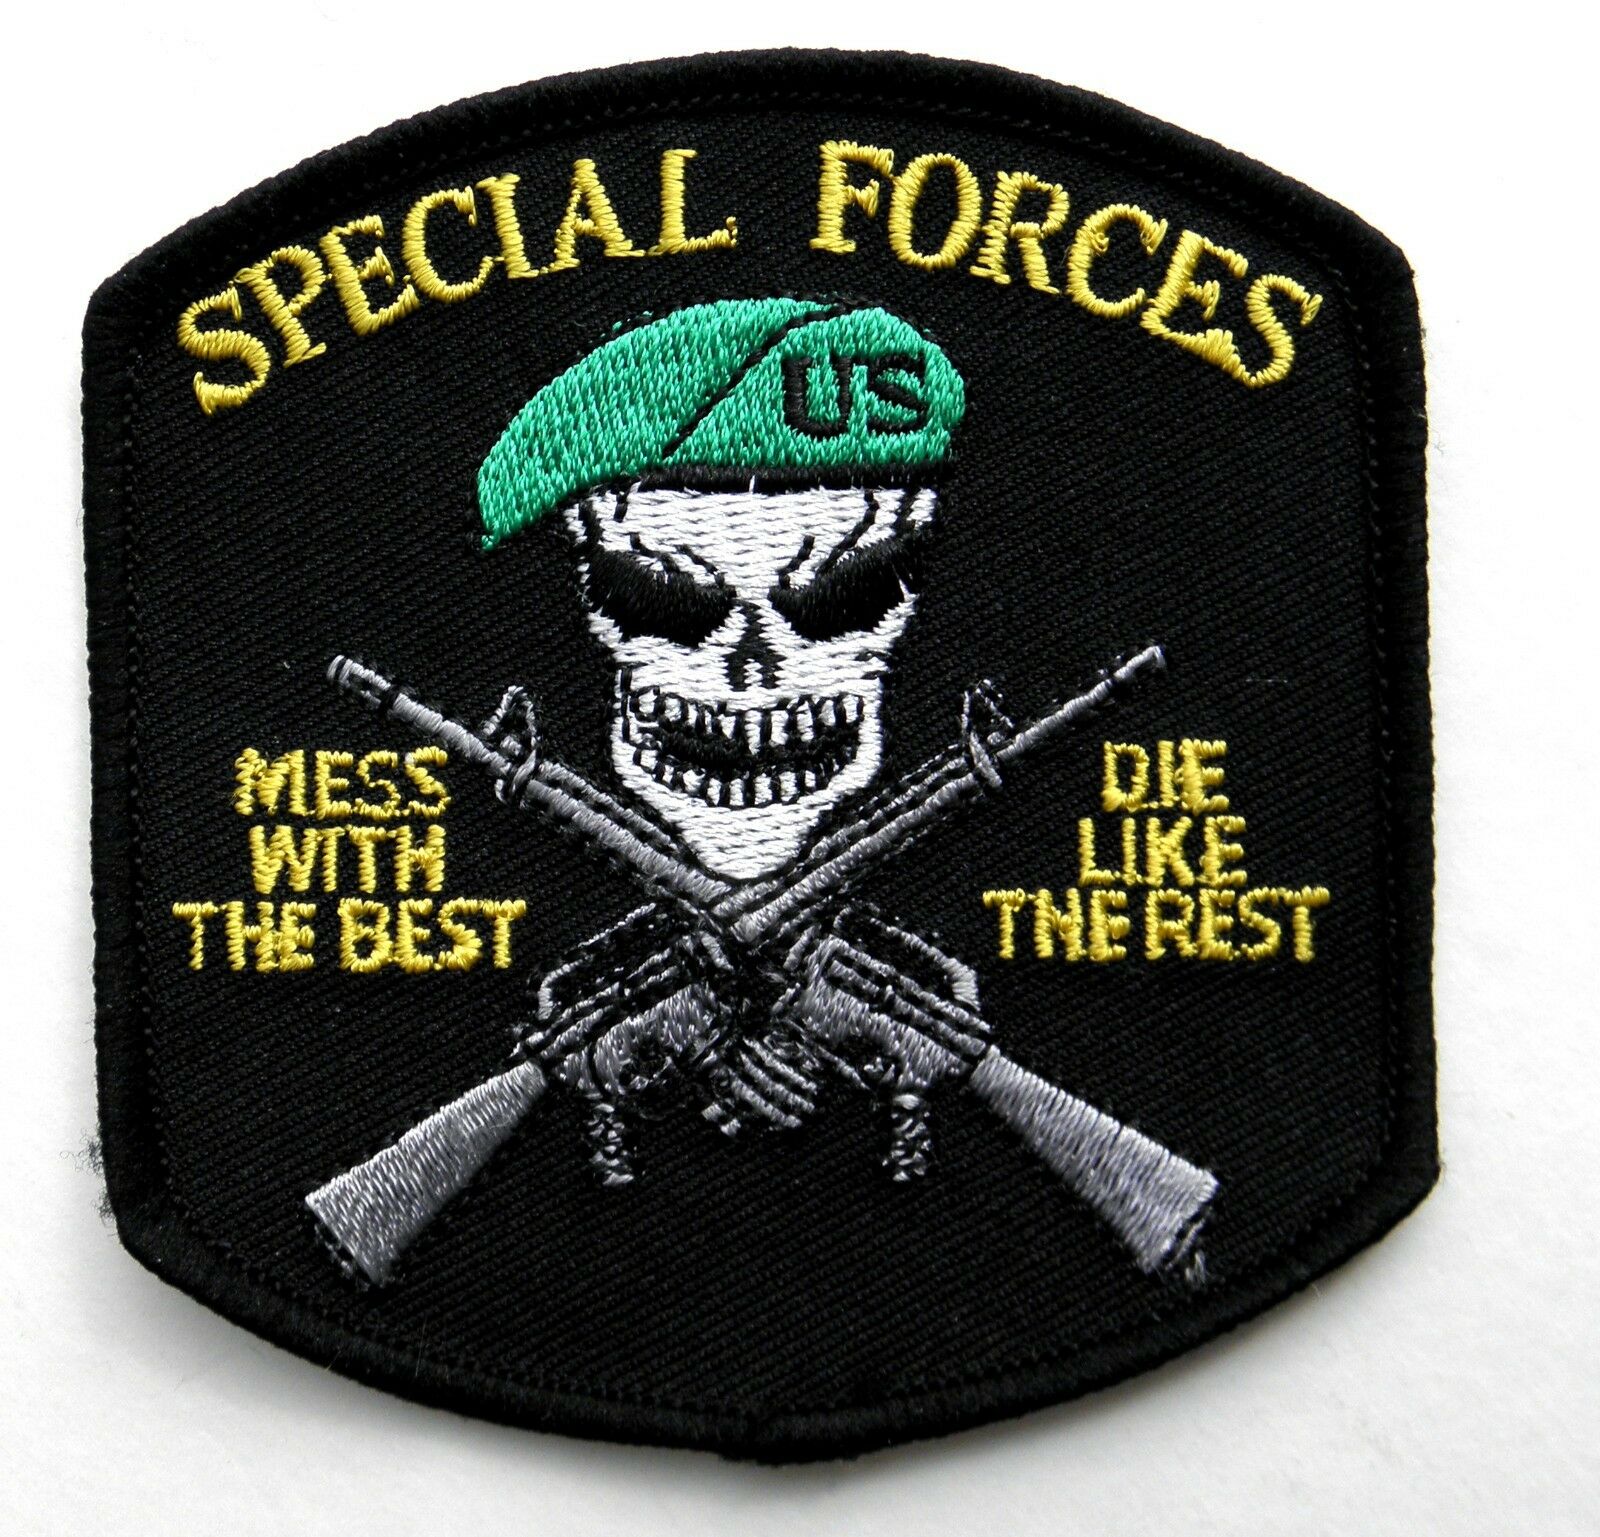 Mess With the Best Special Forces Lapel Pin 1 inch Die Like the Rest 